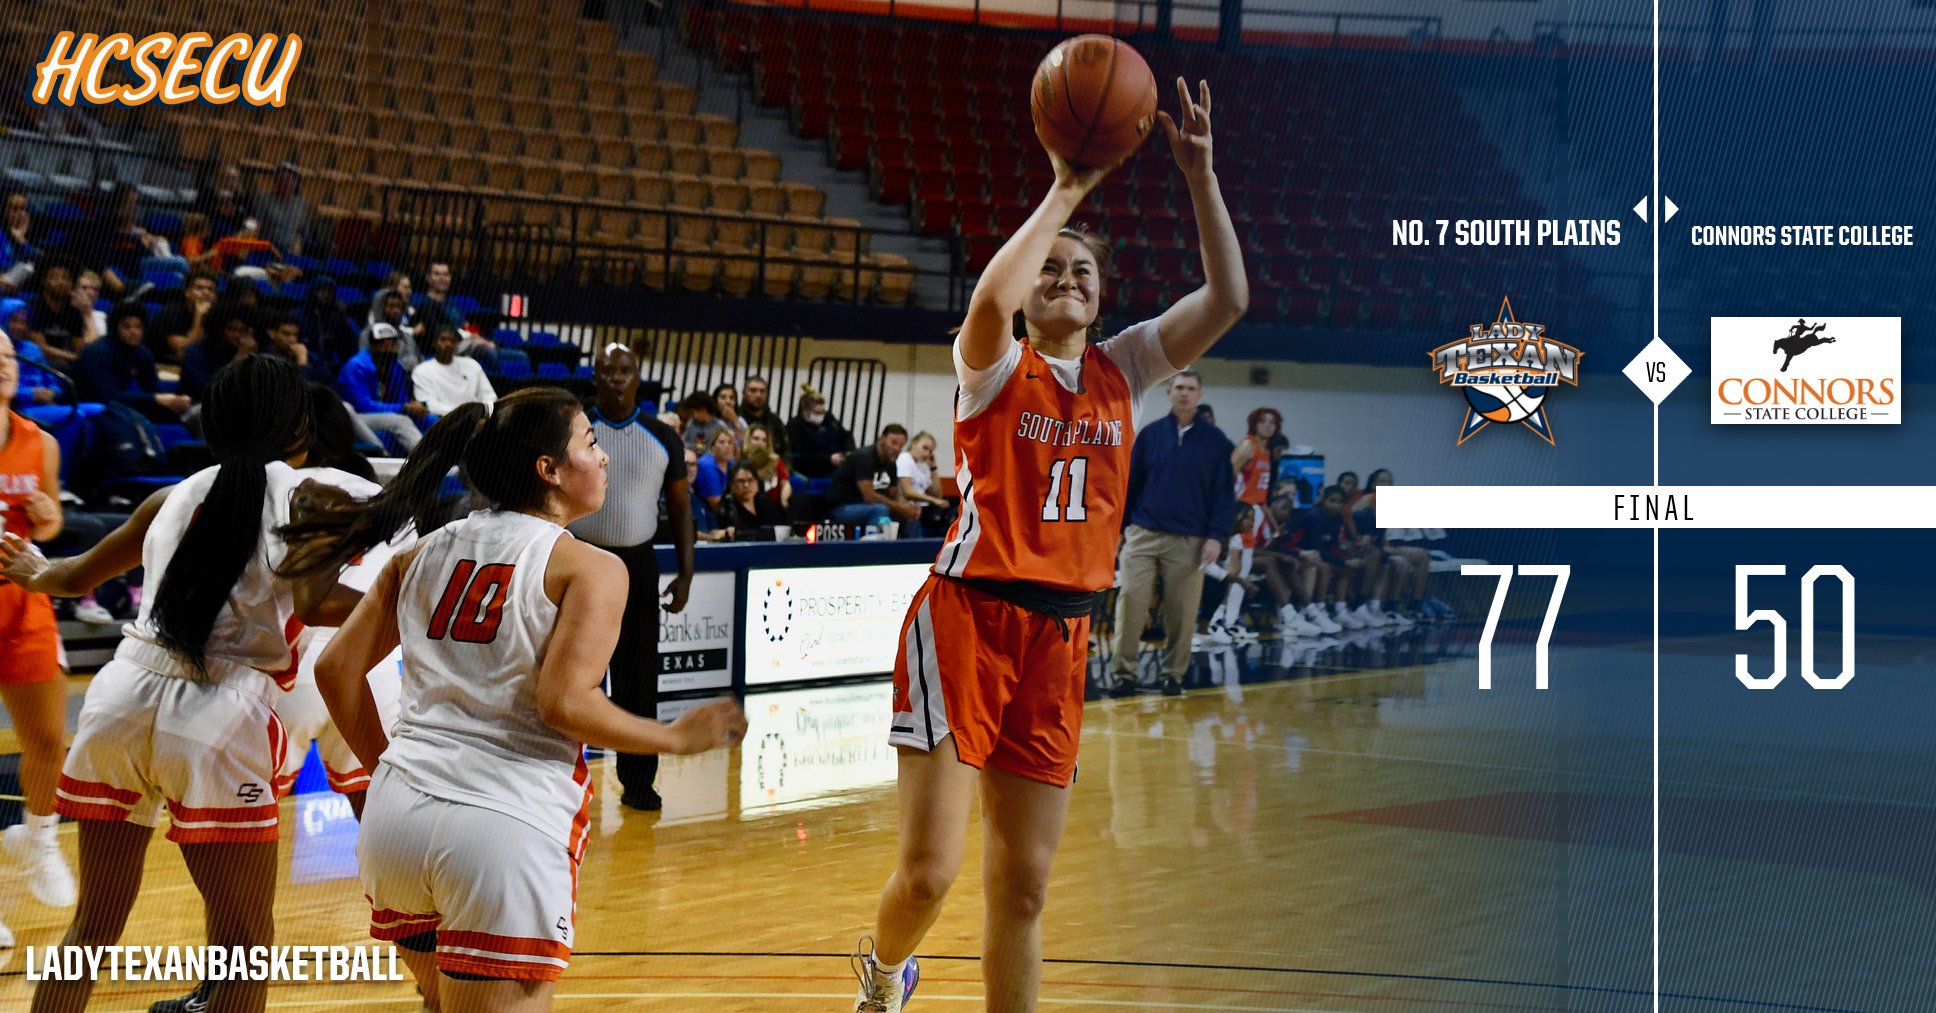 #7 Lady Texans oust Connors State College 77-50 Friday